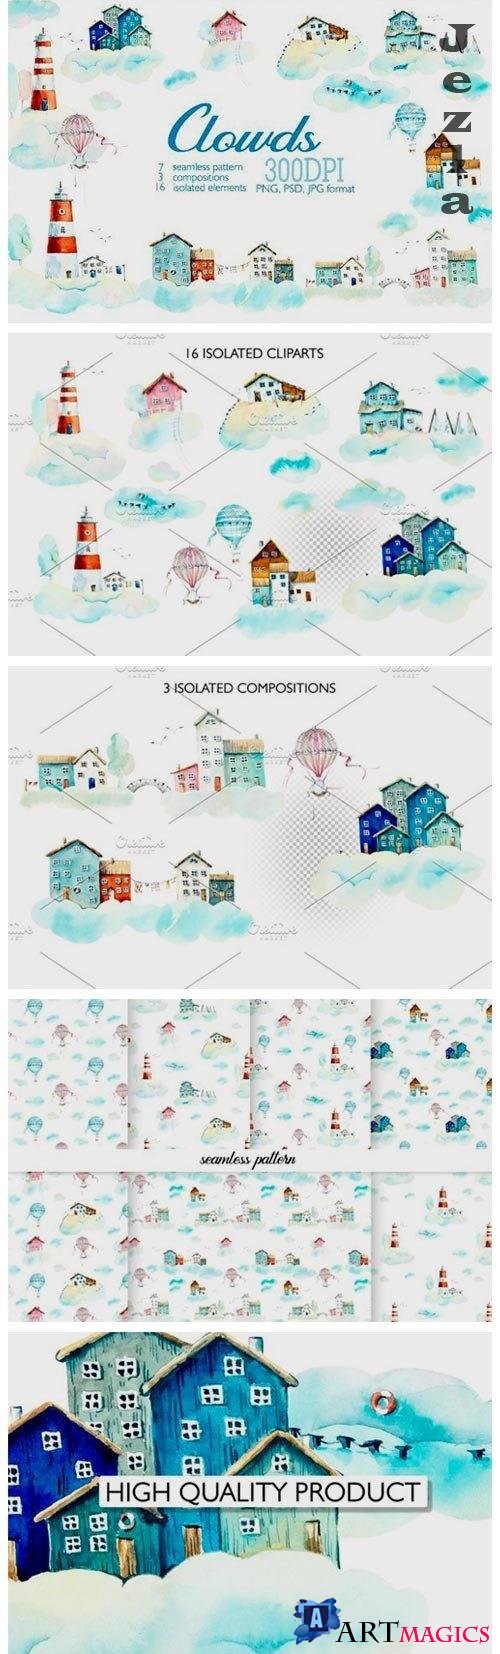 Watercolor houses in clouds - 4031732